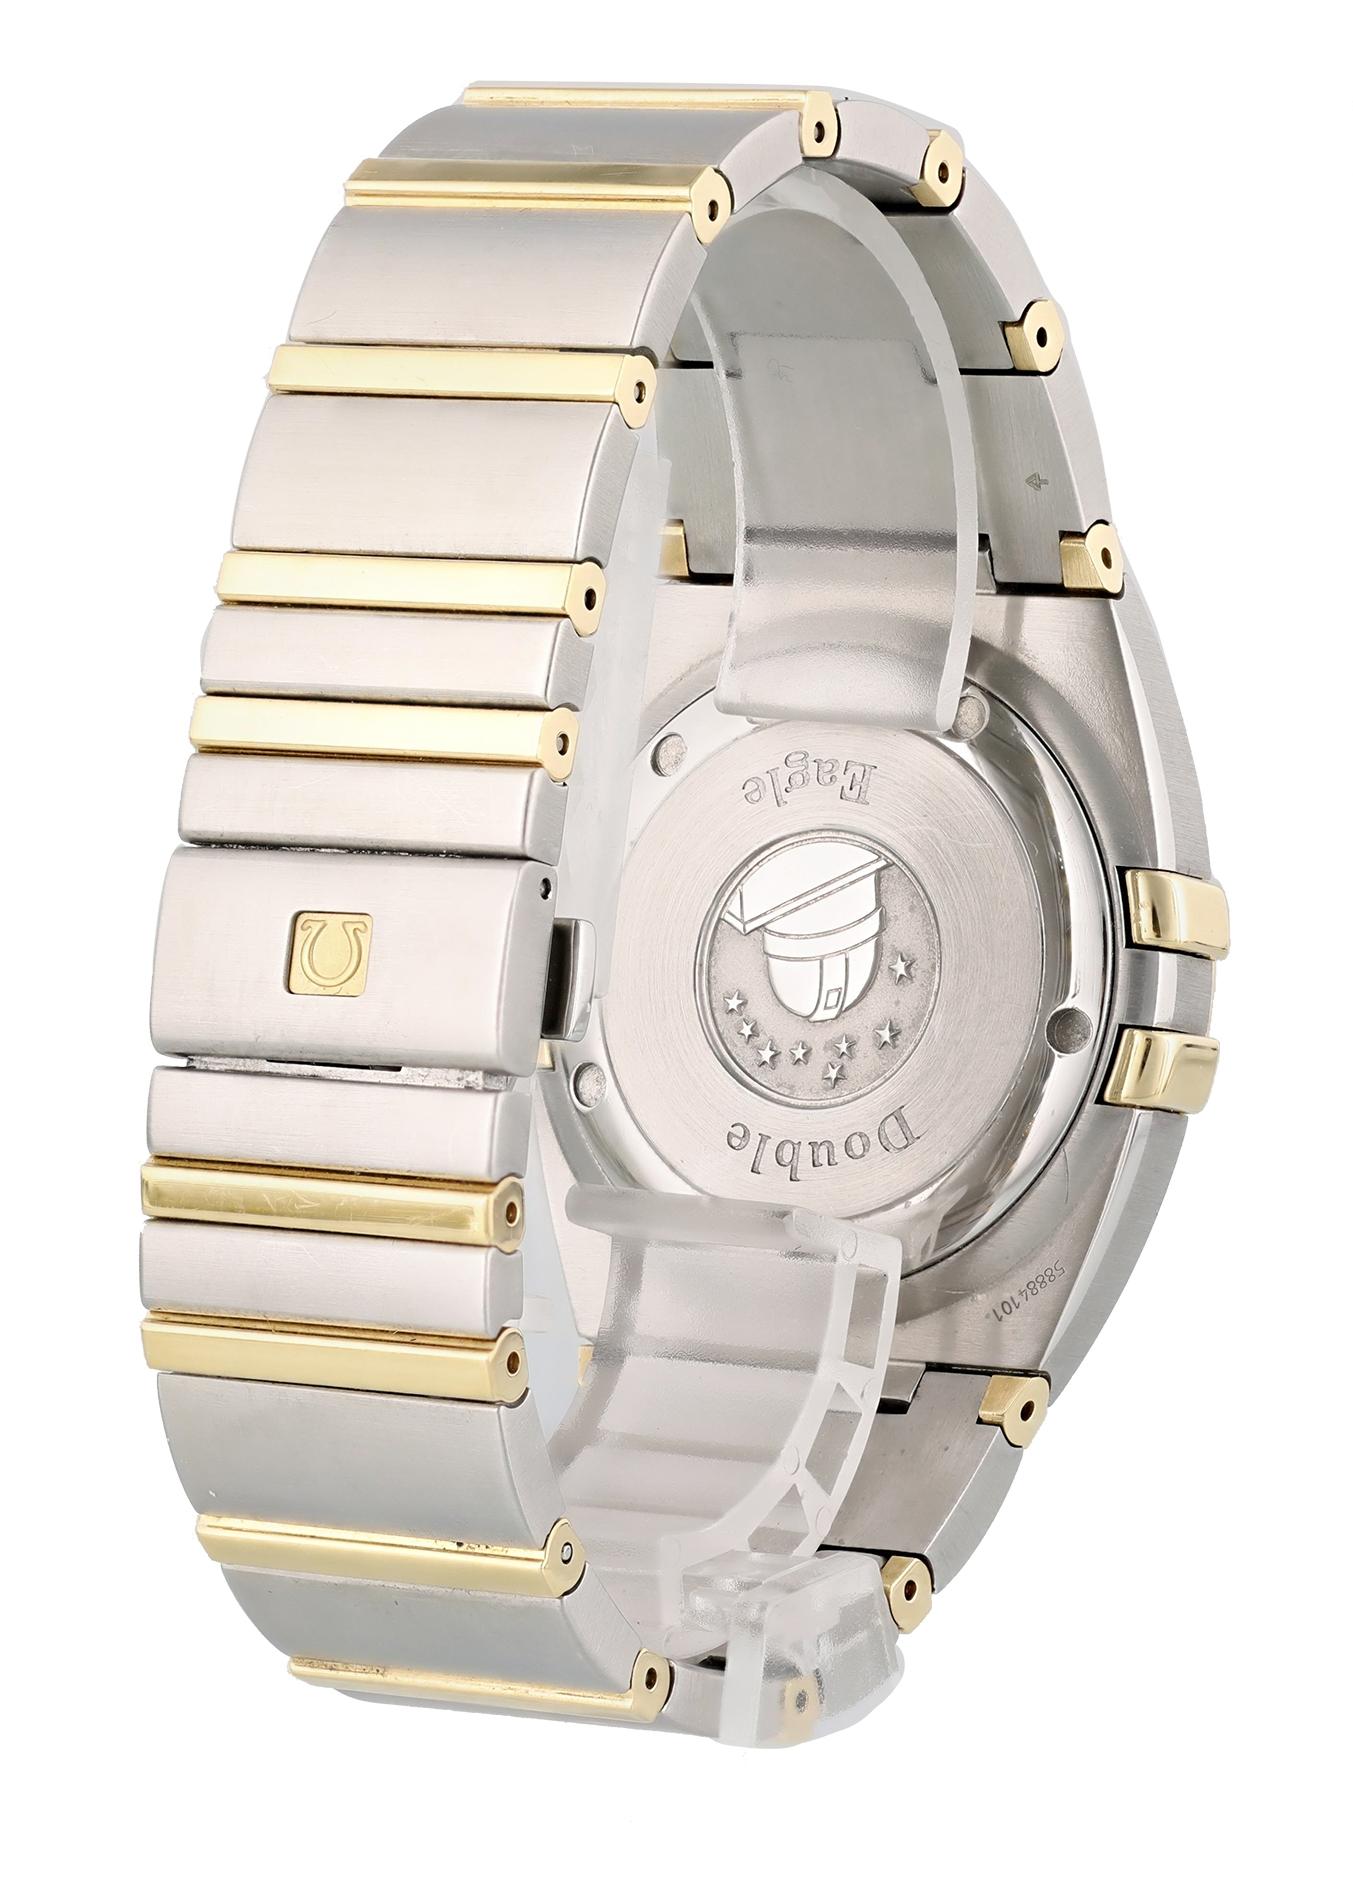 Omega Constellation Double Eagle 1213.30.00 Men's Watch For Sale 1